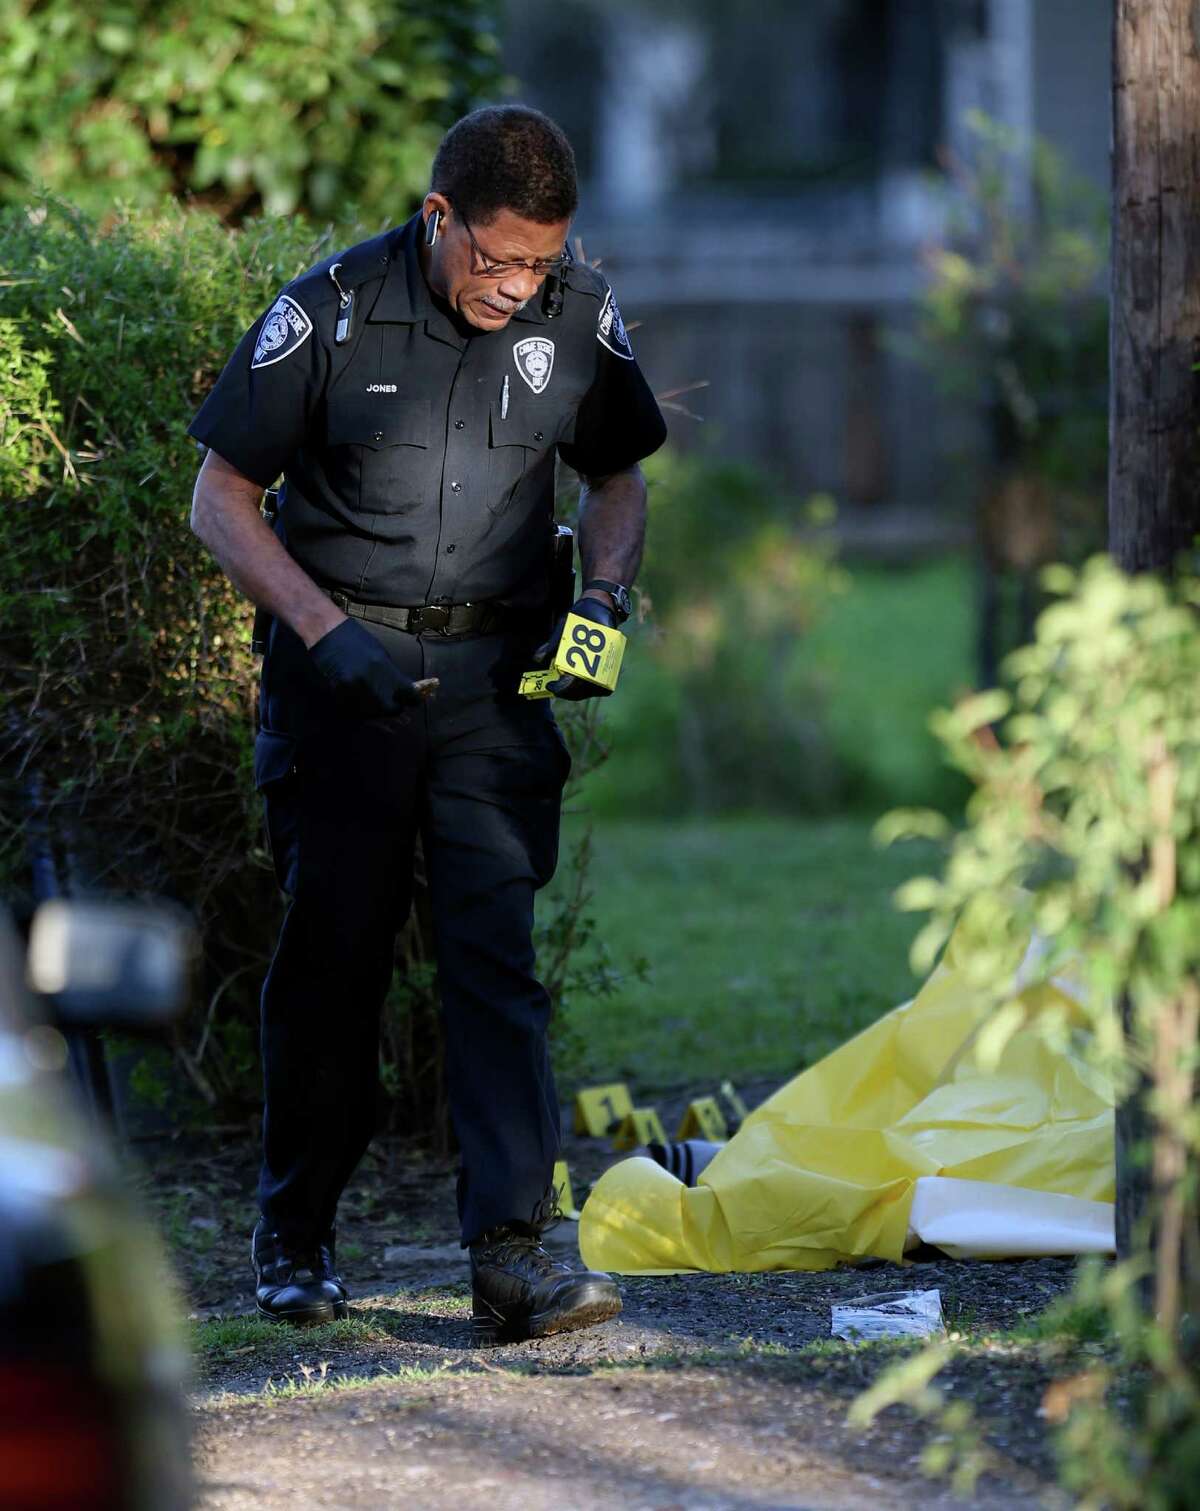 An evidence technician places evidence markers Tuesday afternoon, Feb. 22, 2016 near the body of a shooting victim in the 300 block of Belmont. Three people were shot in the incident that police described as a shootout. One person died at the scene. One person was transported to SAMMC from the scene. The third victim was found near Houston and Lasoya before being transported to SAMMC. Both injured victims were in critical condition, police said.